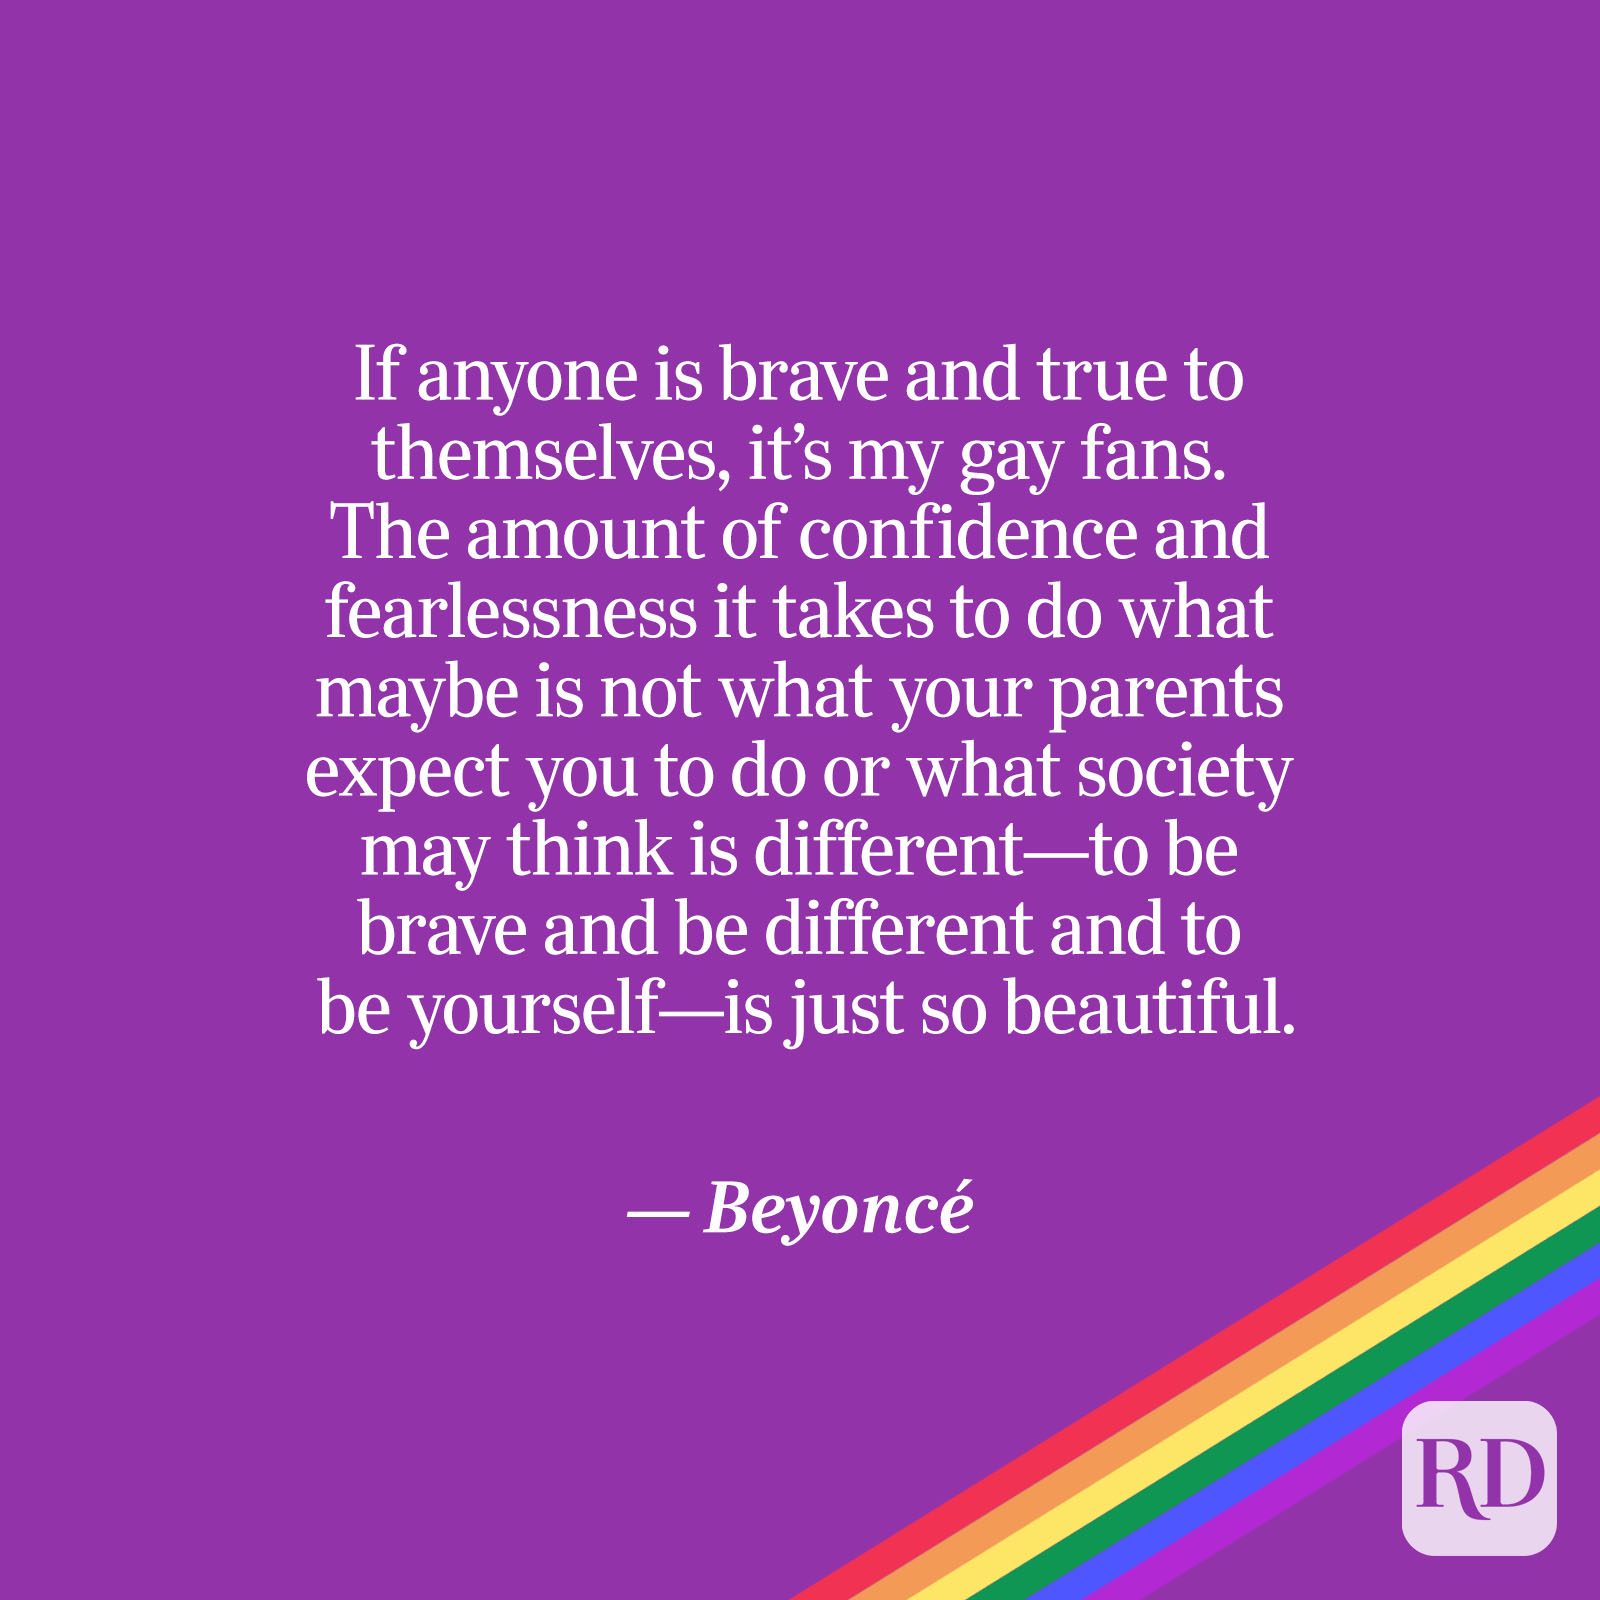 Beyoncé quote on purple with rainbow accent